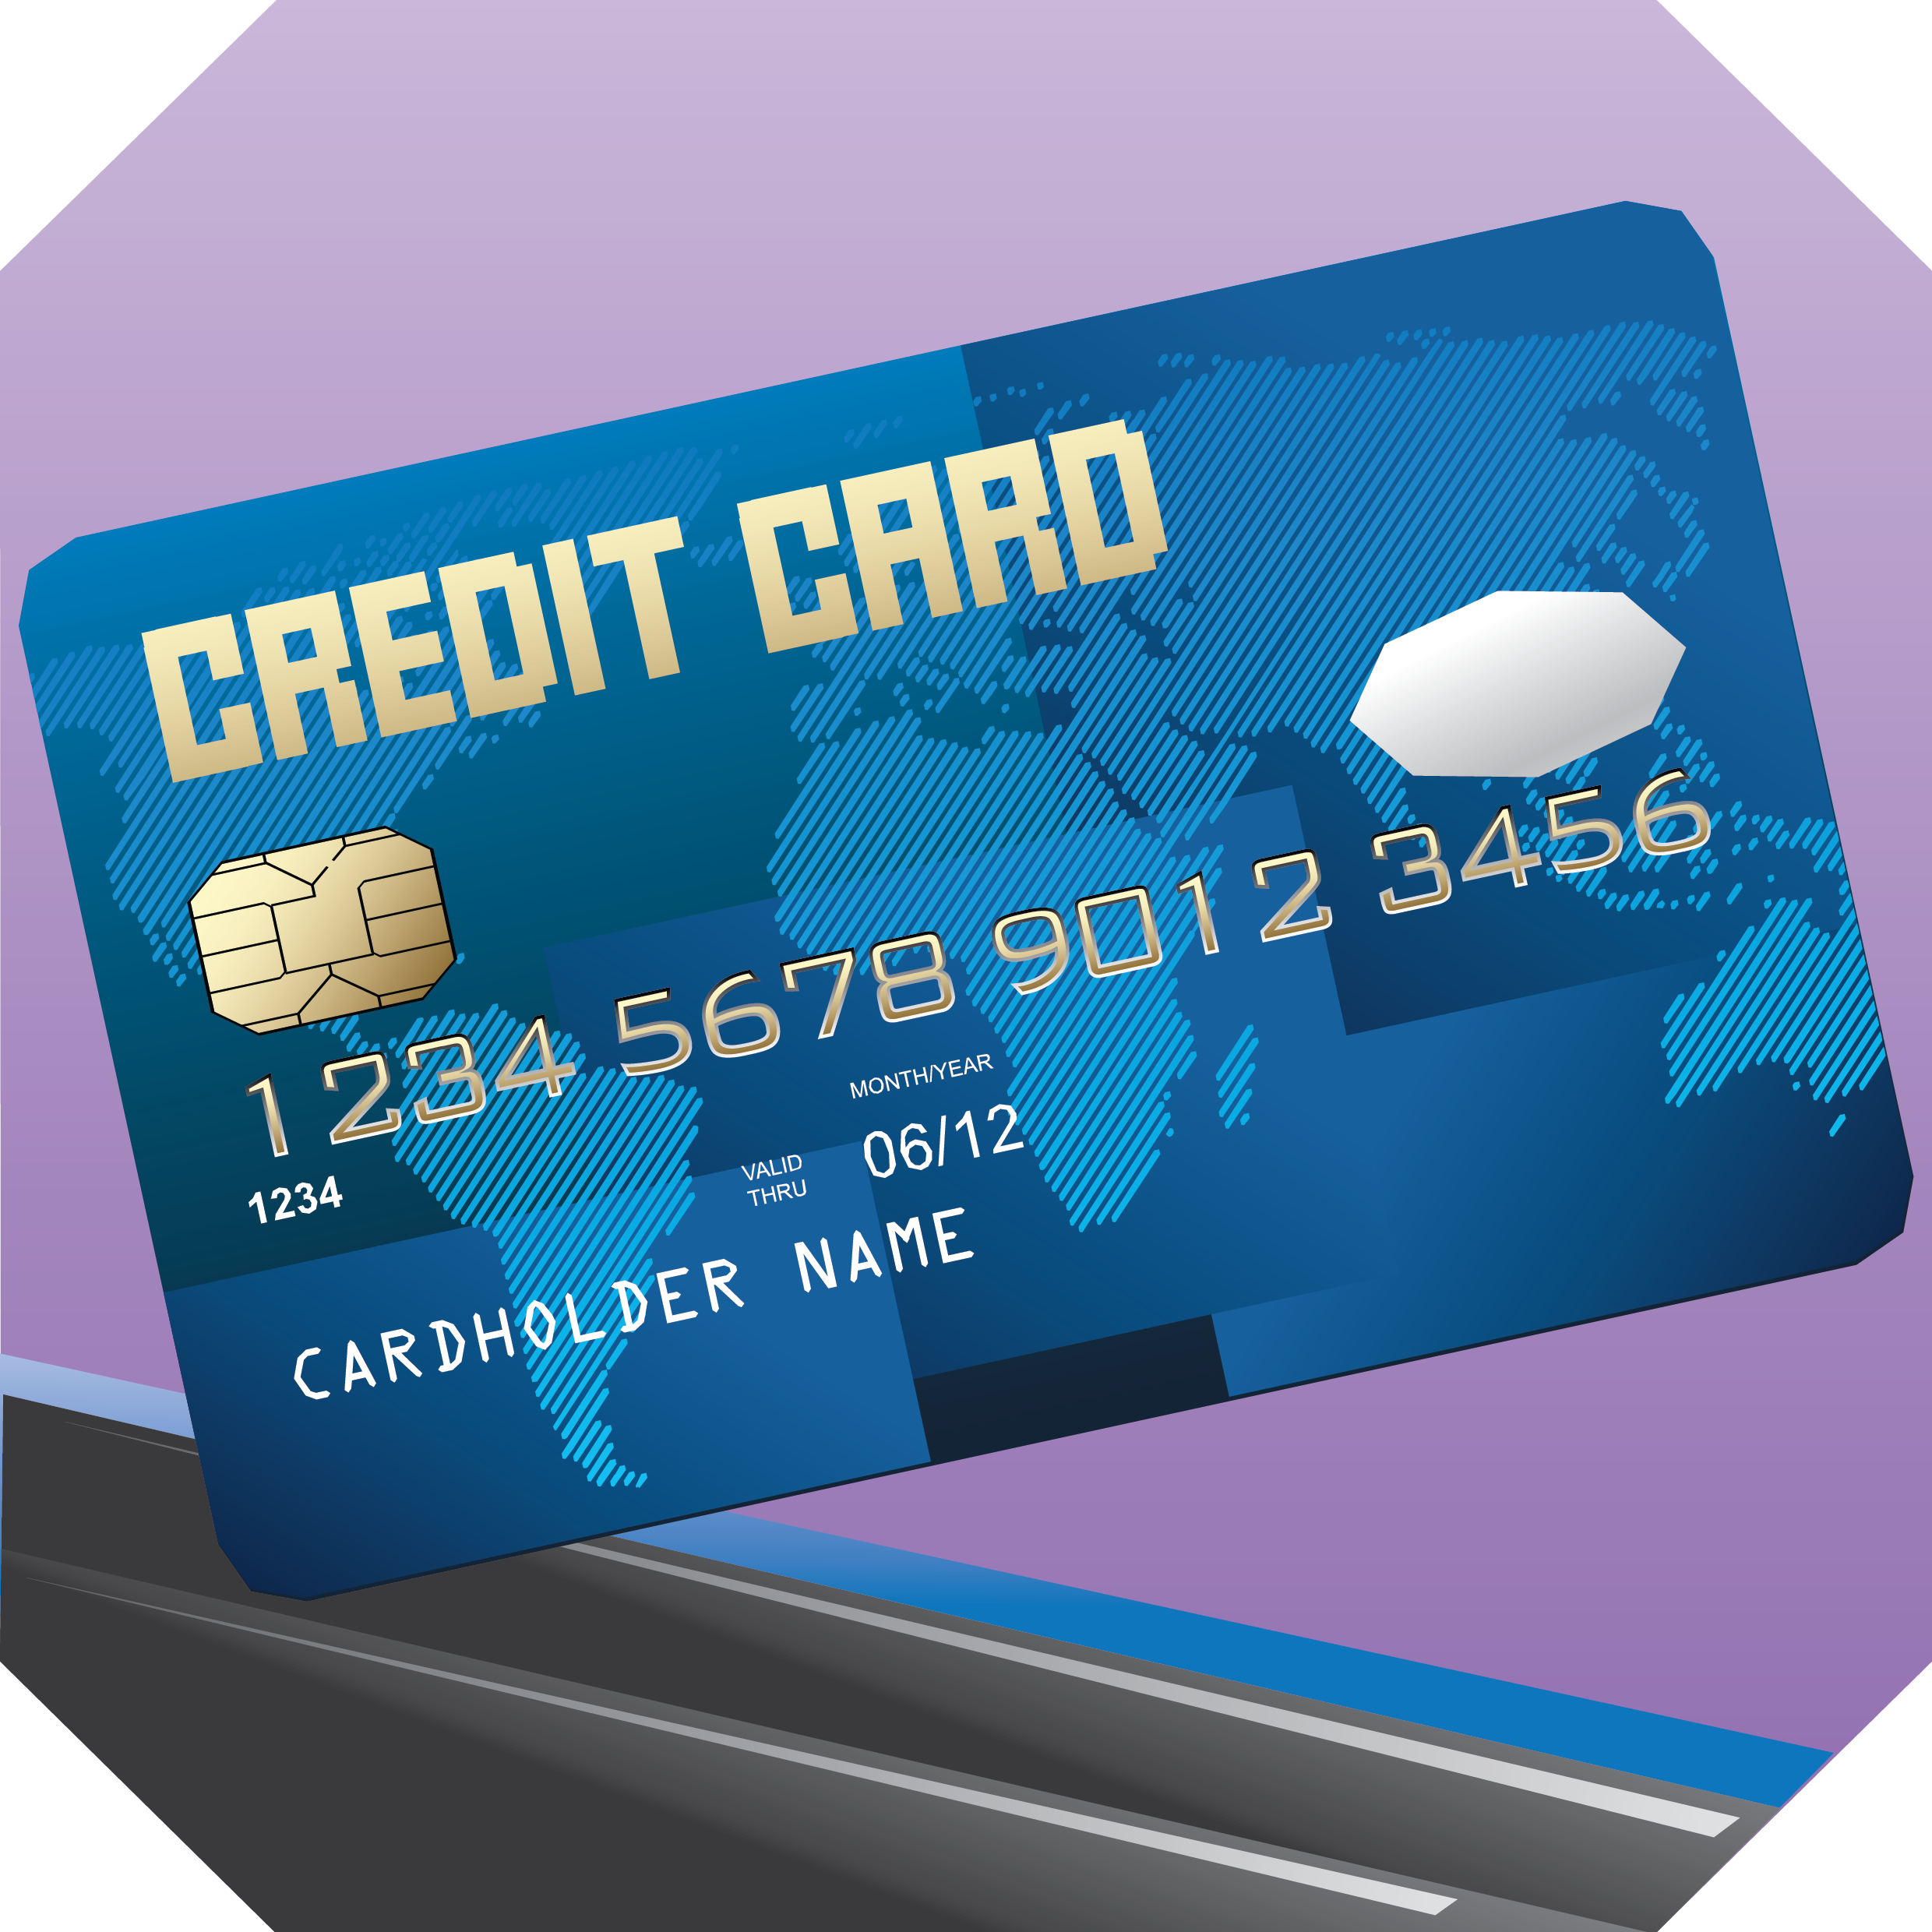 What If Your Credit Card Doesn’t Work When You’re Traveling Internationally?